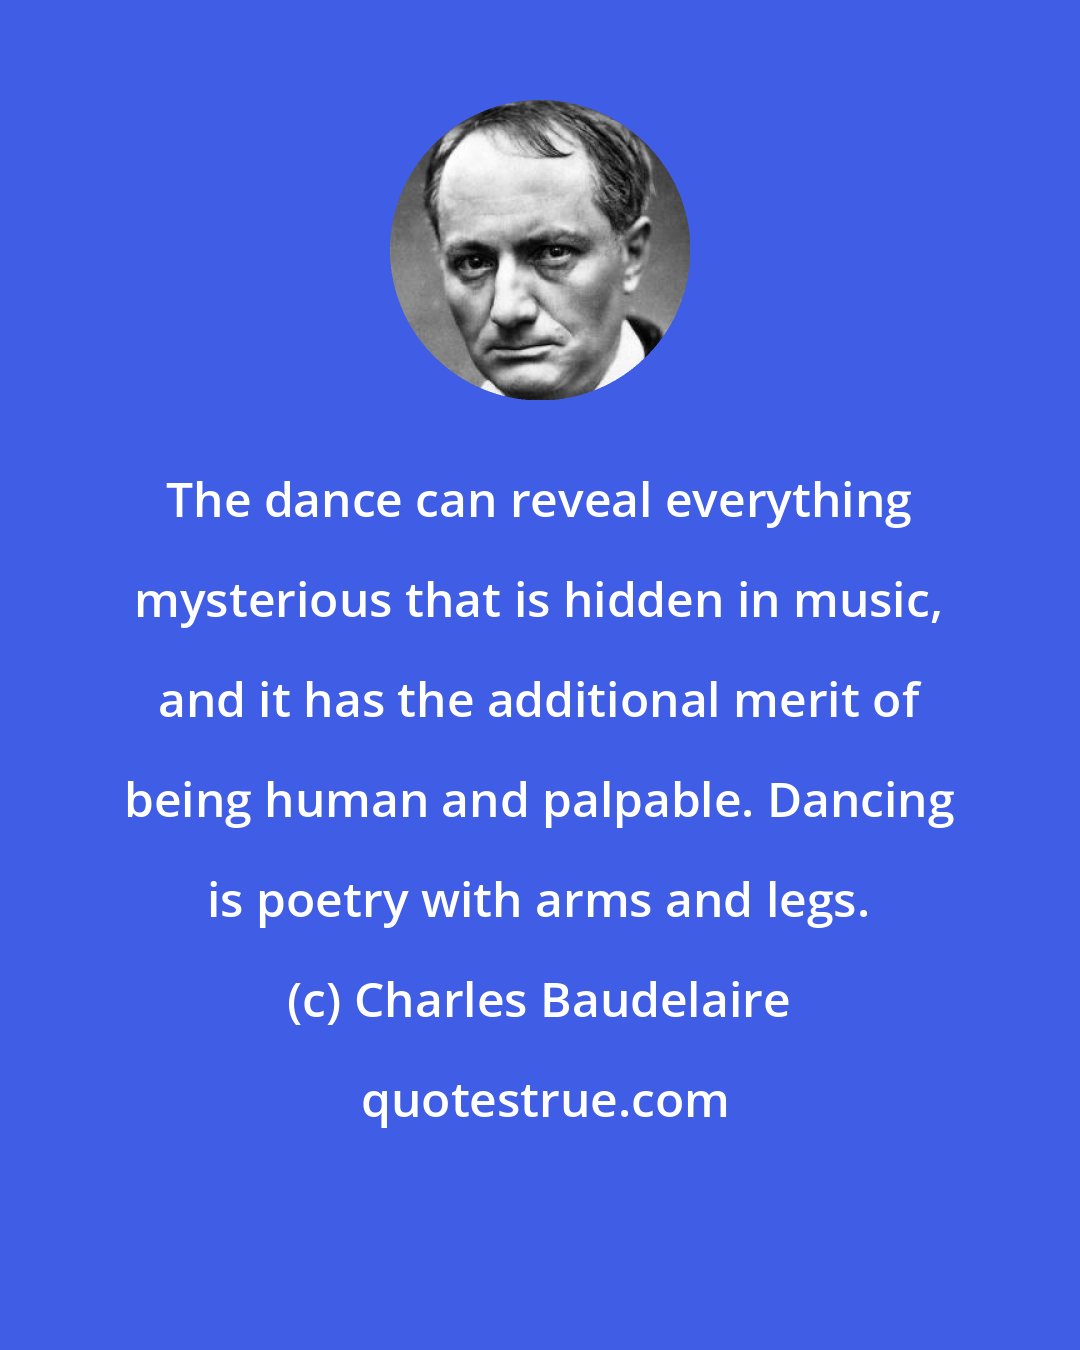 Charles Baudelaire: The dance can reveal everything mysterious that is hidden in music, and it has the additional merit of being human and palpable. Dancing is poetry with arms and legs.